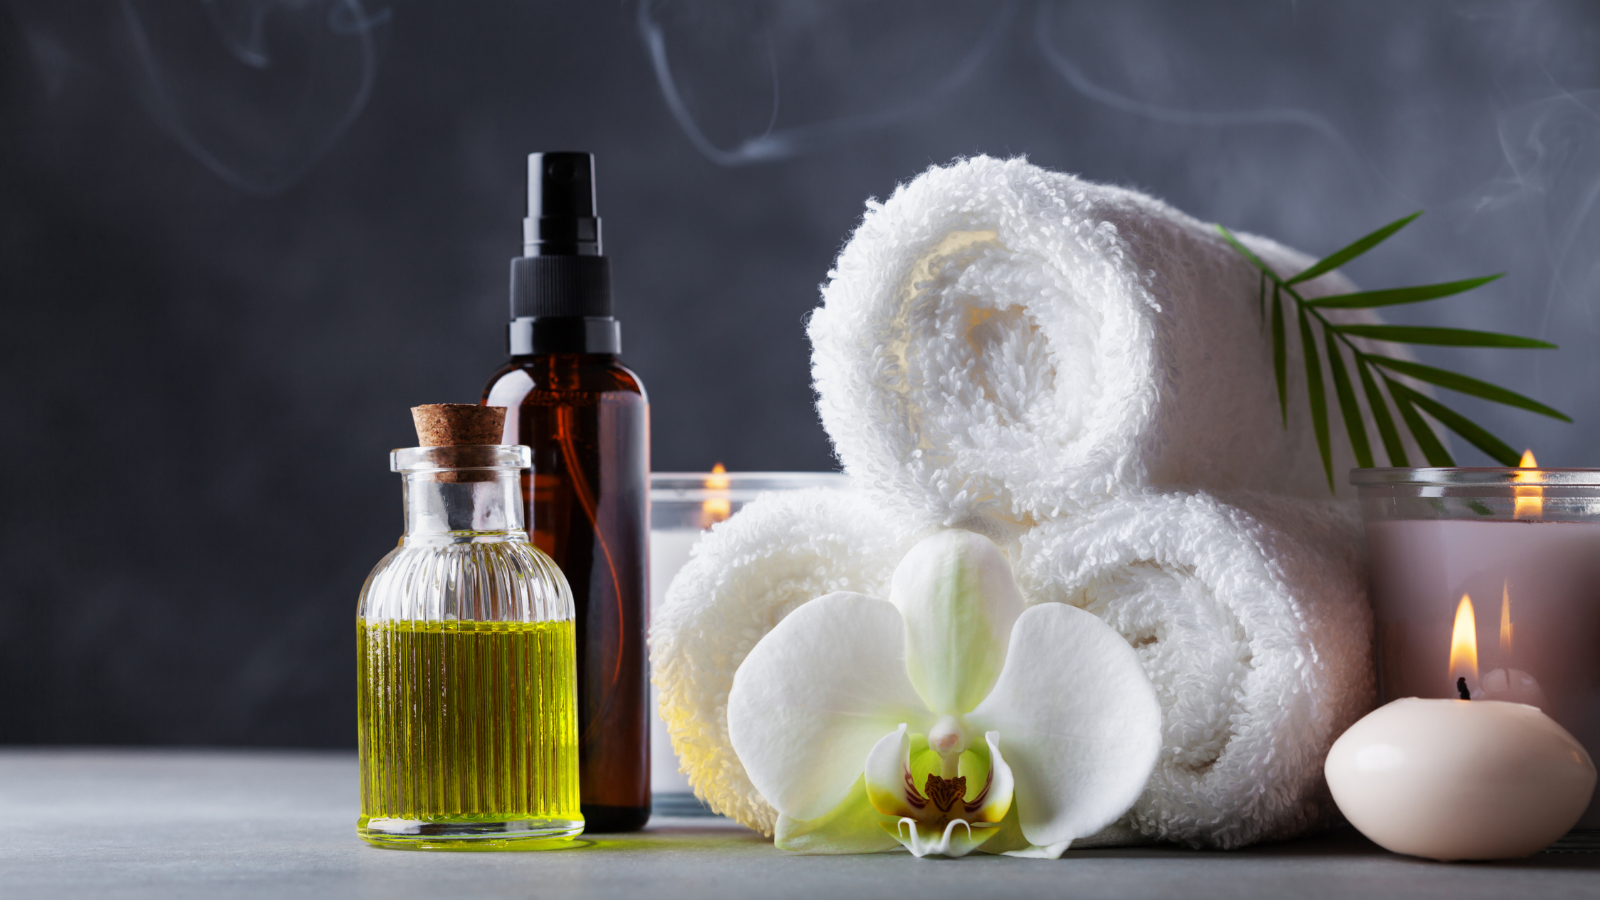 Aromatherapy, spa, beauty treatment and wellness background with massage oil, orchid flowers, towels, and candles.